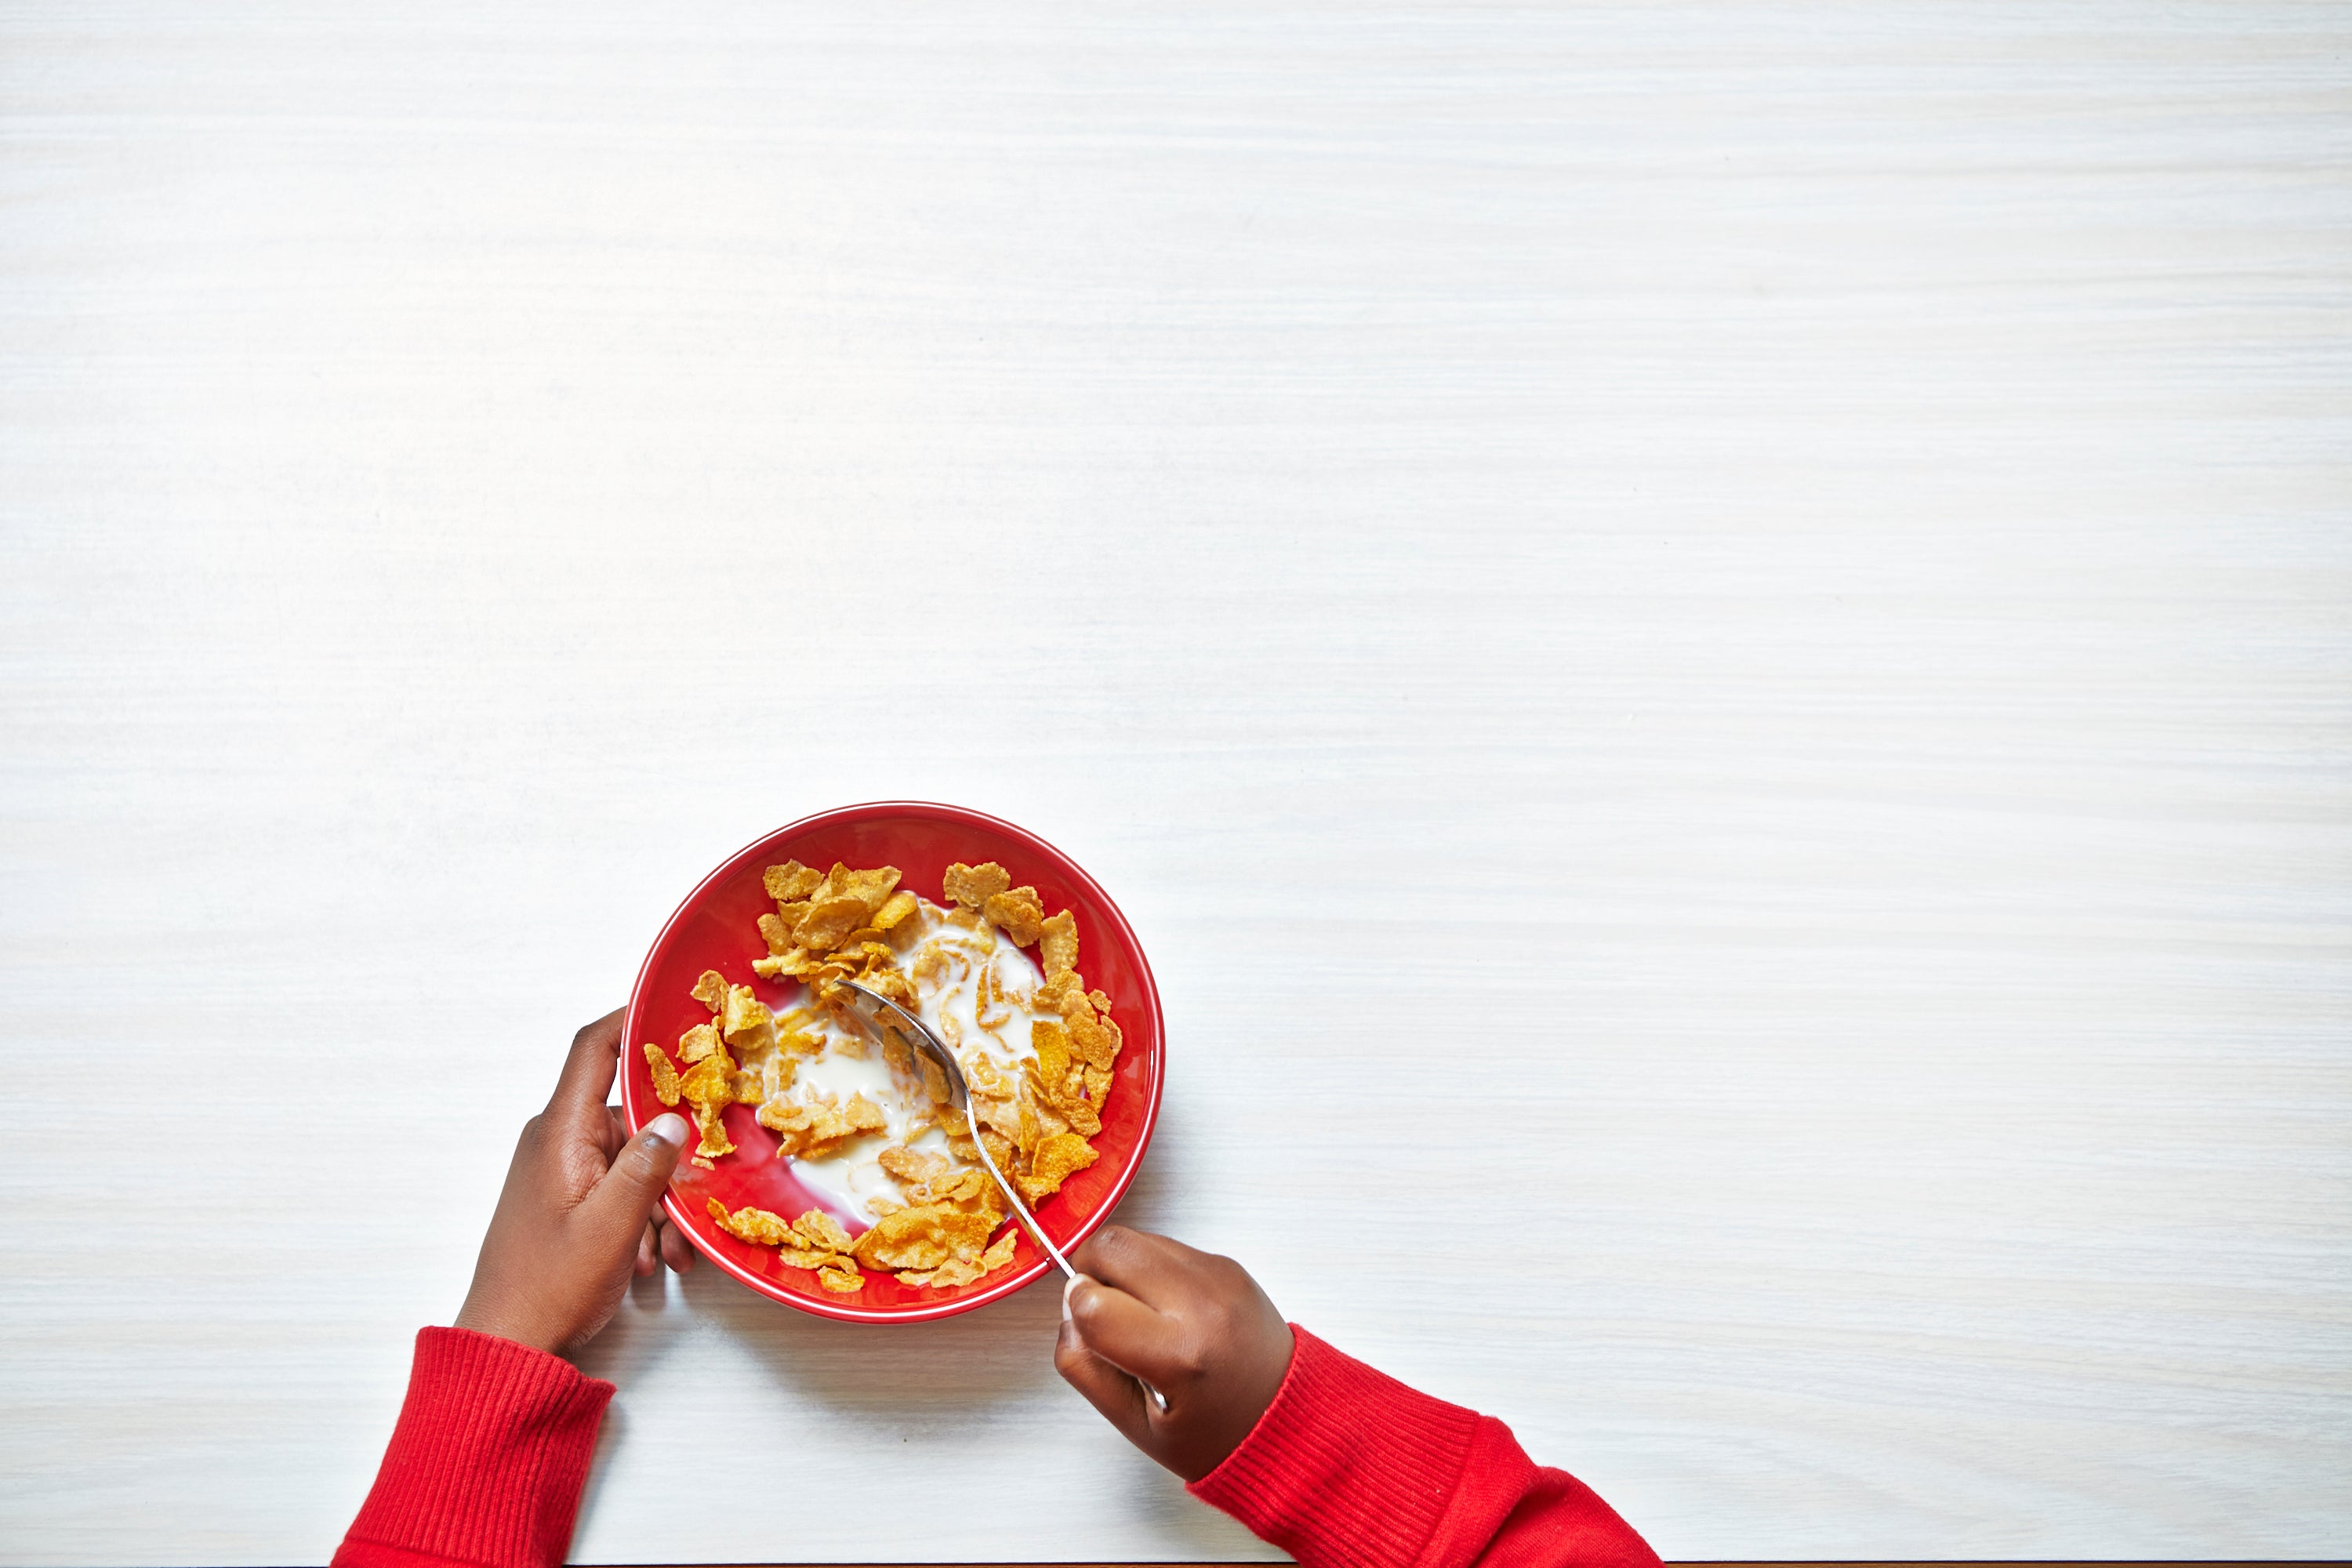 Kellogg’s are providing grants to help schools with the cost of running their breakfast club